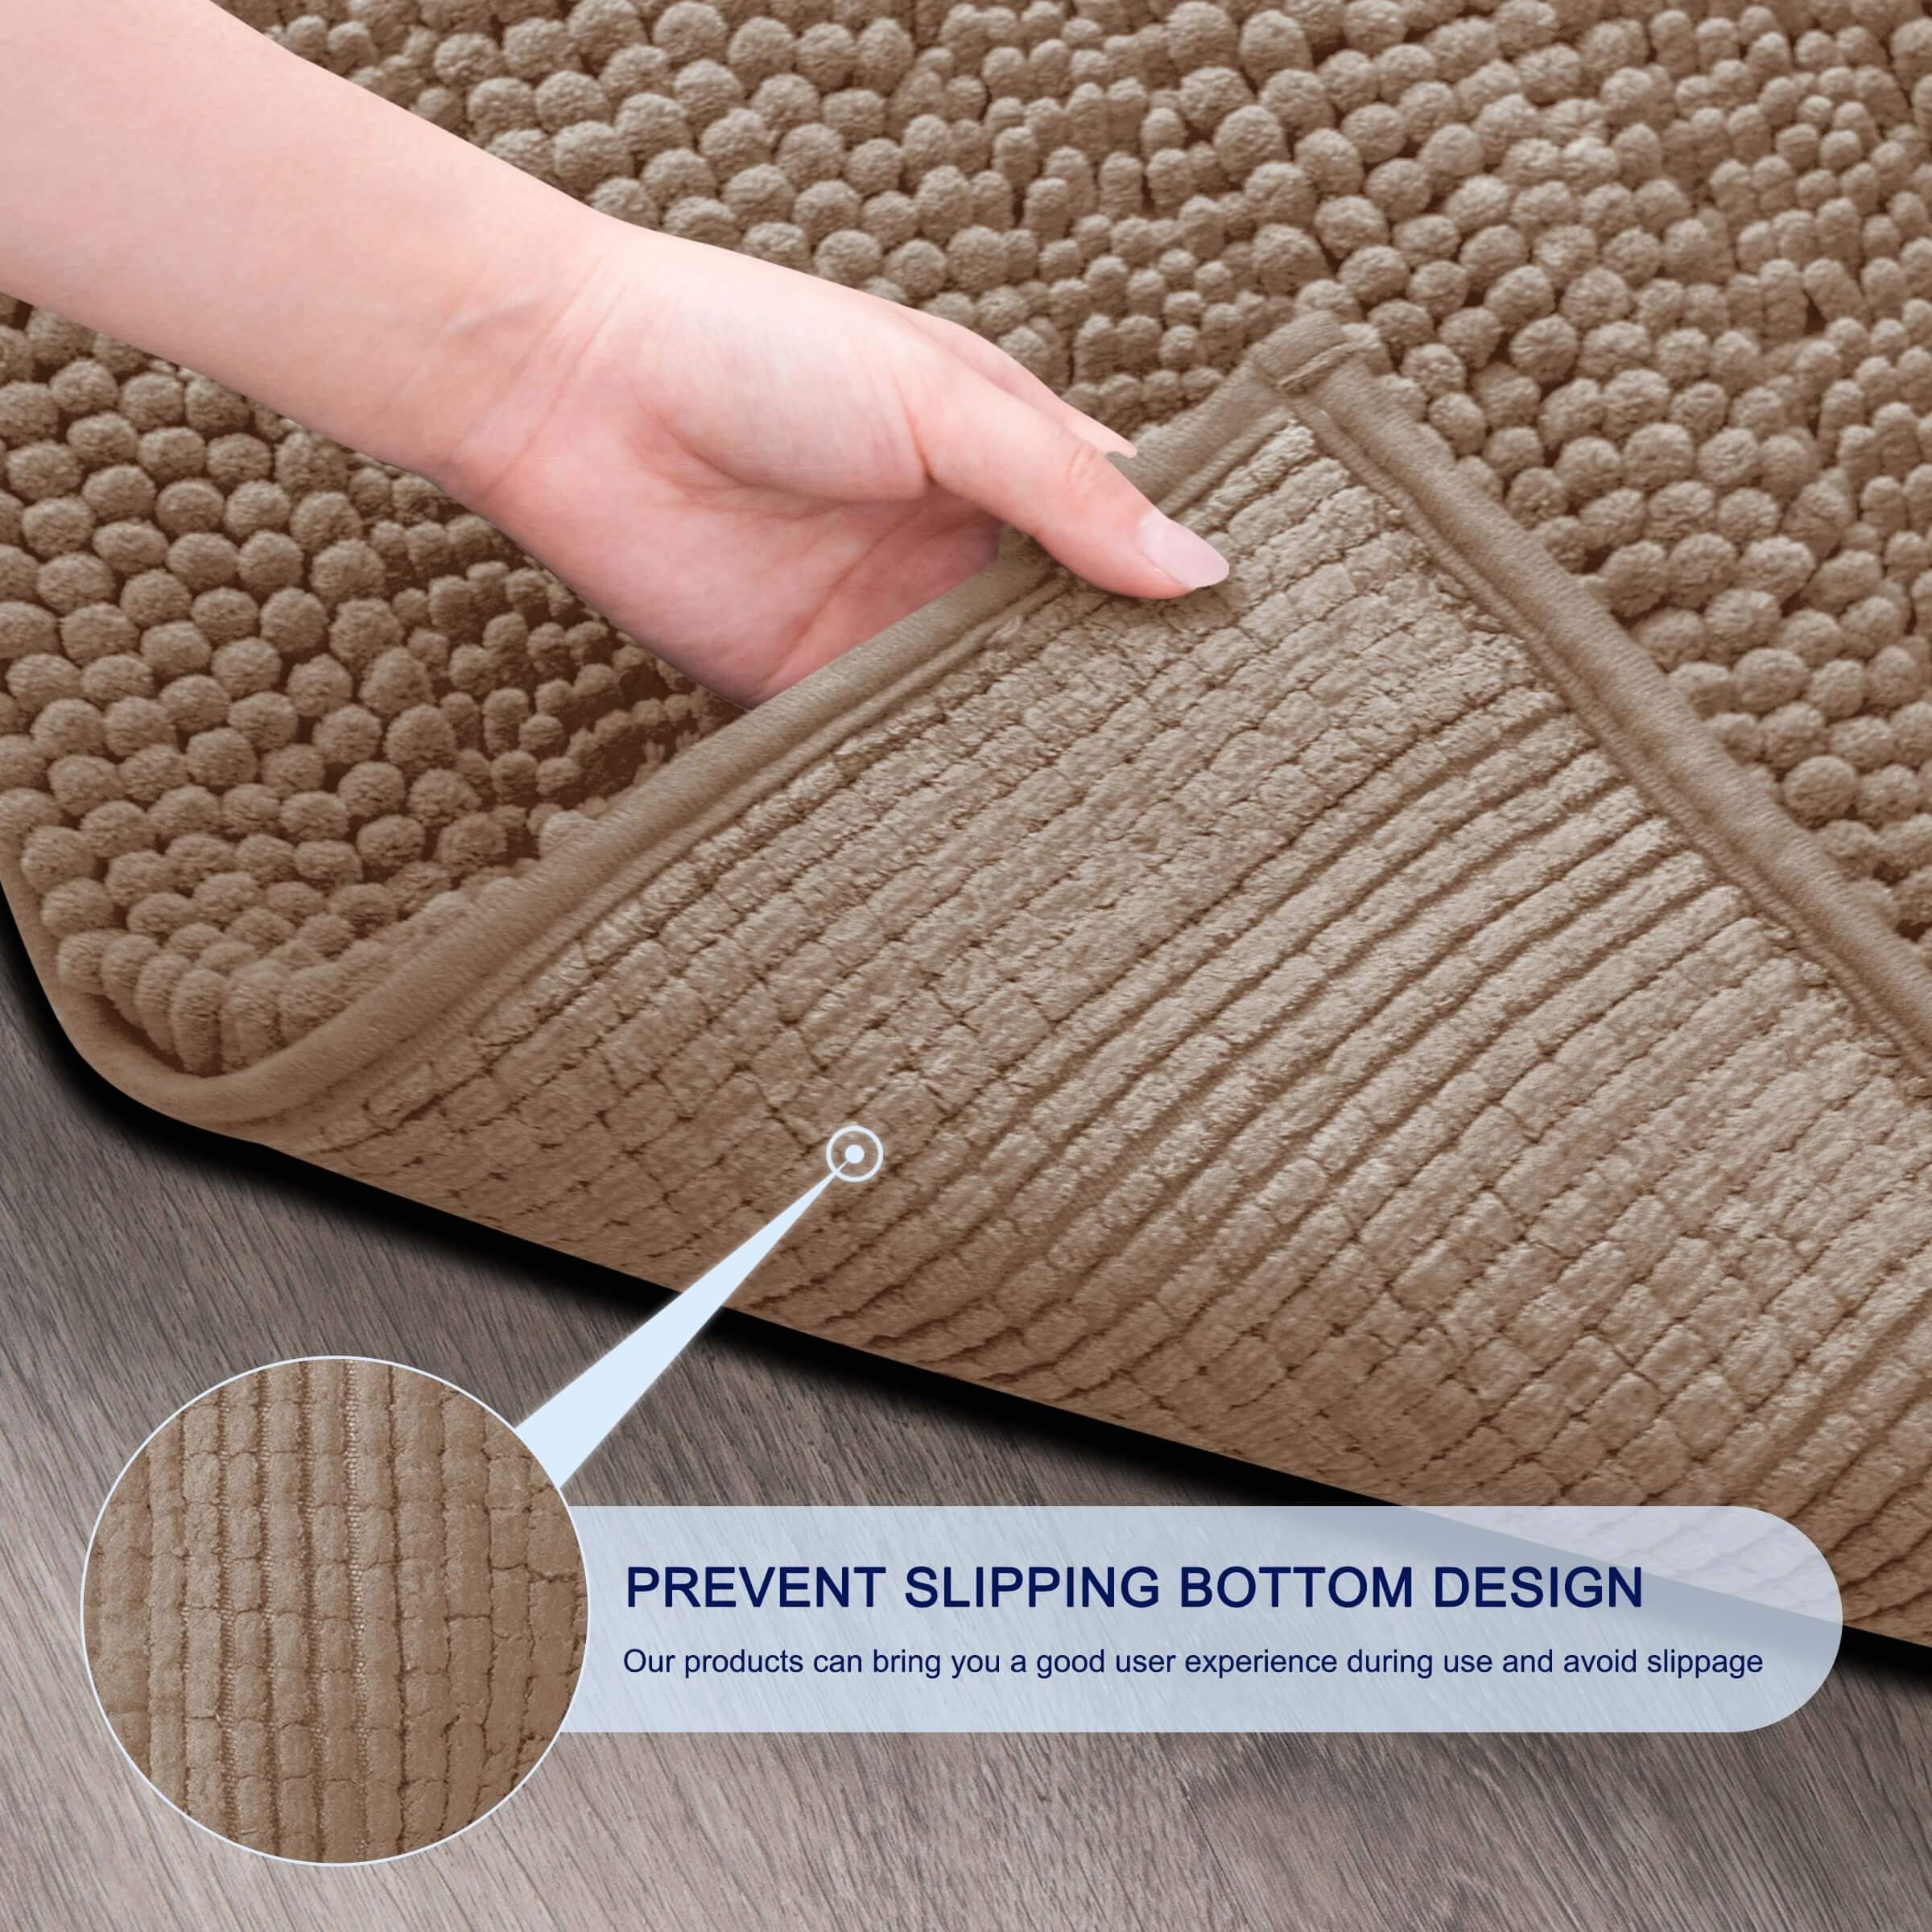 https://ak1.ostkcdn.com/images/products/is/images/direct/376b305cf0eb48aa88a2e40ac0308cb67481a4f1/Subrtex-Supersoft-and-Absorbent-Braided-Bathroom-Rugs-Chenille-Bath-Rugs.jpg